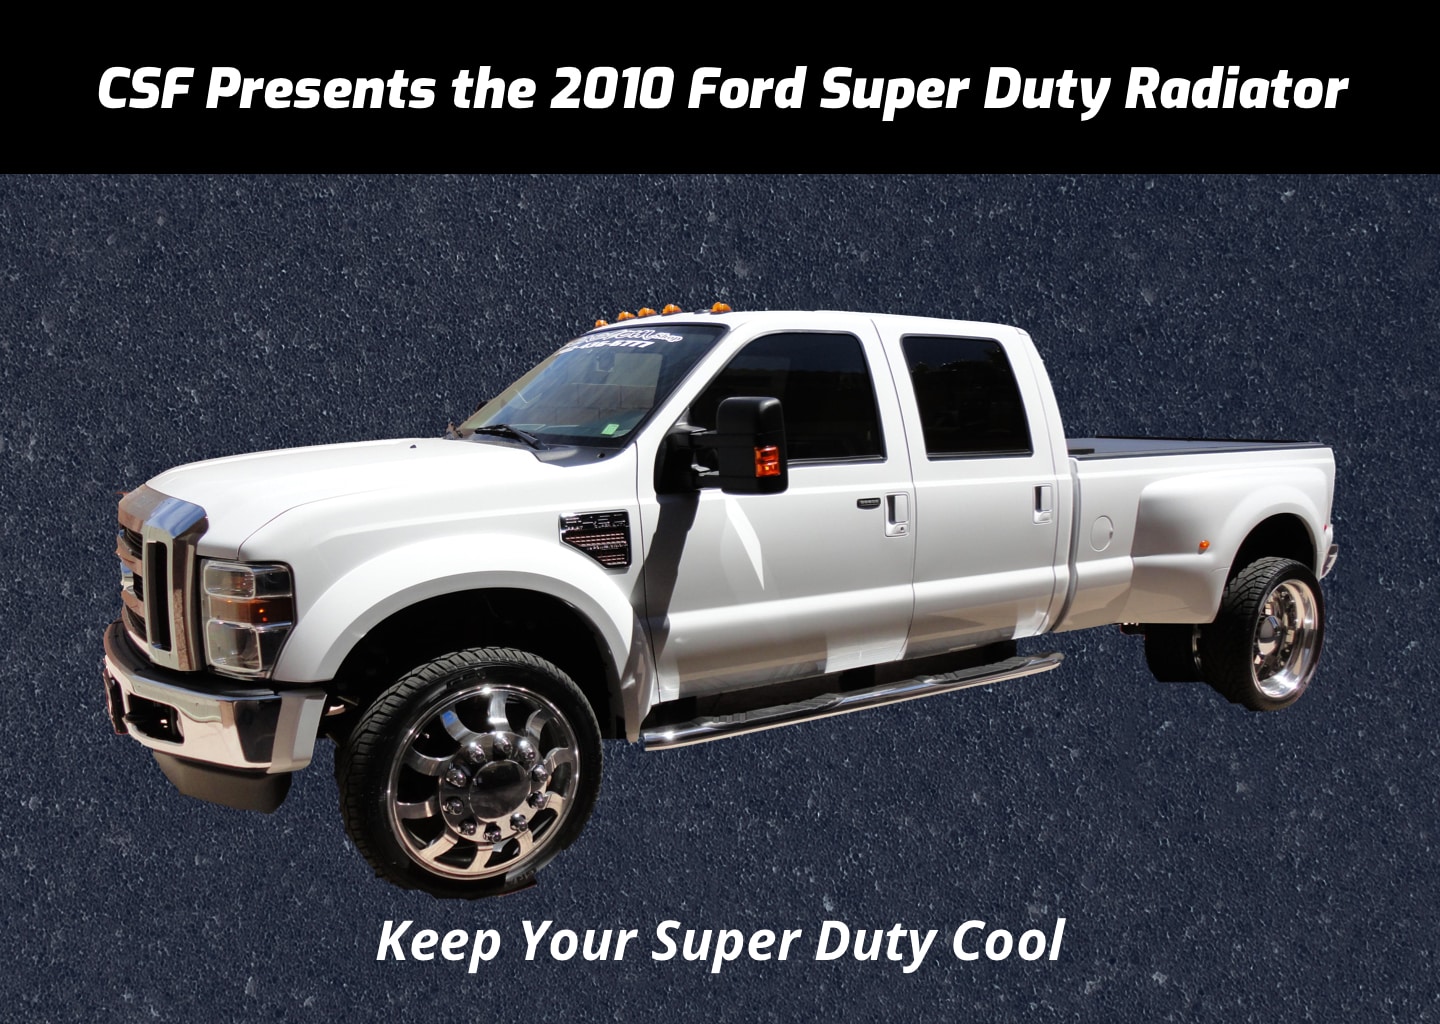 2010 Ford Super Duty Radiator Product Release